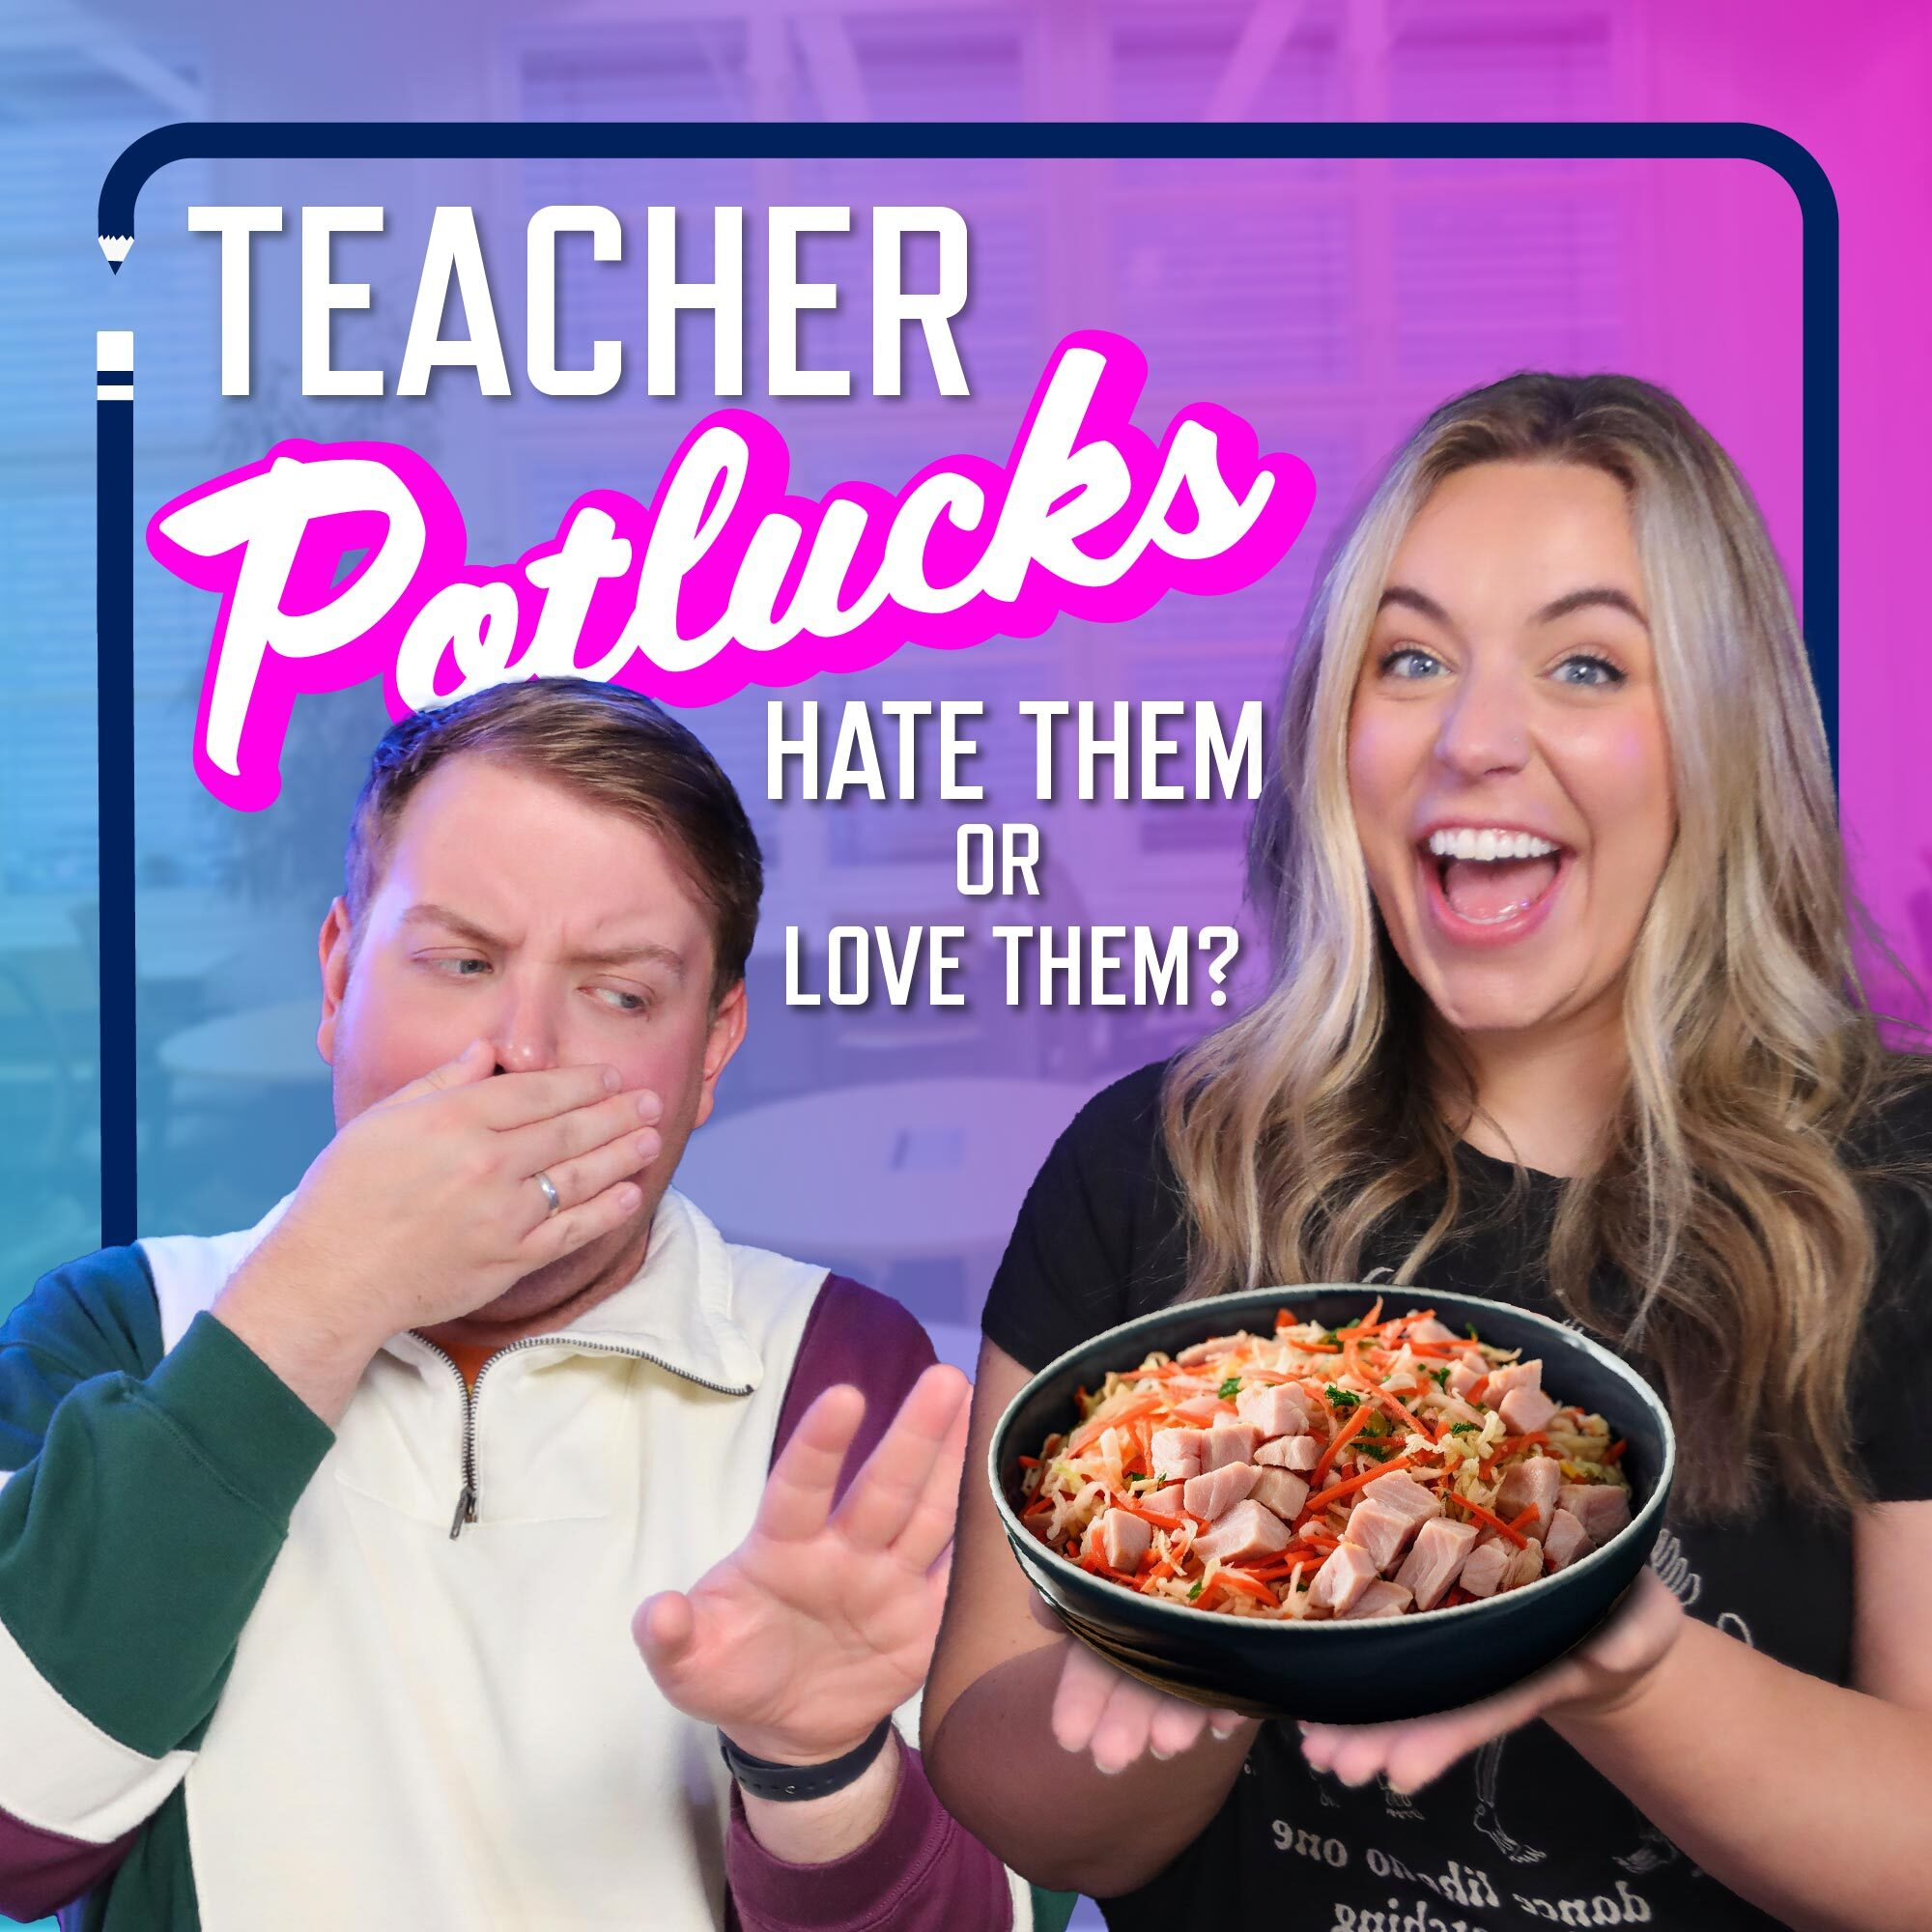 Teacher Potlucks: The Good, The Bad, And The Inedible